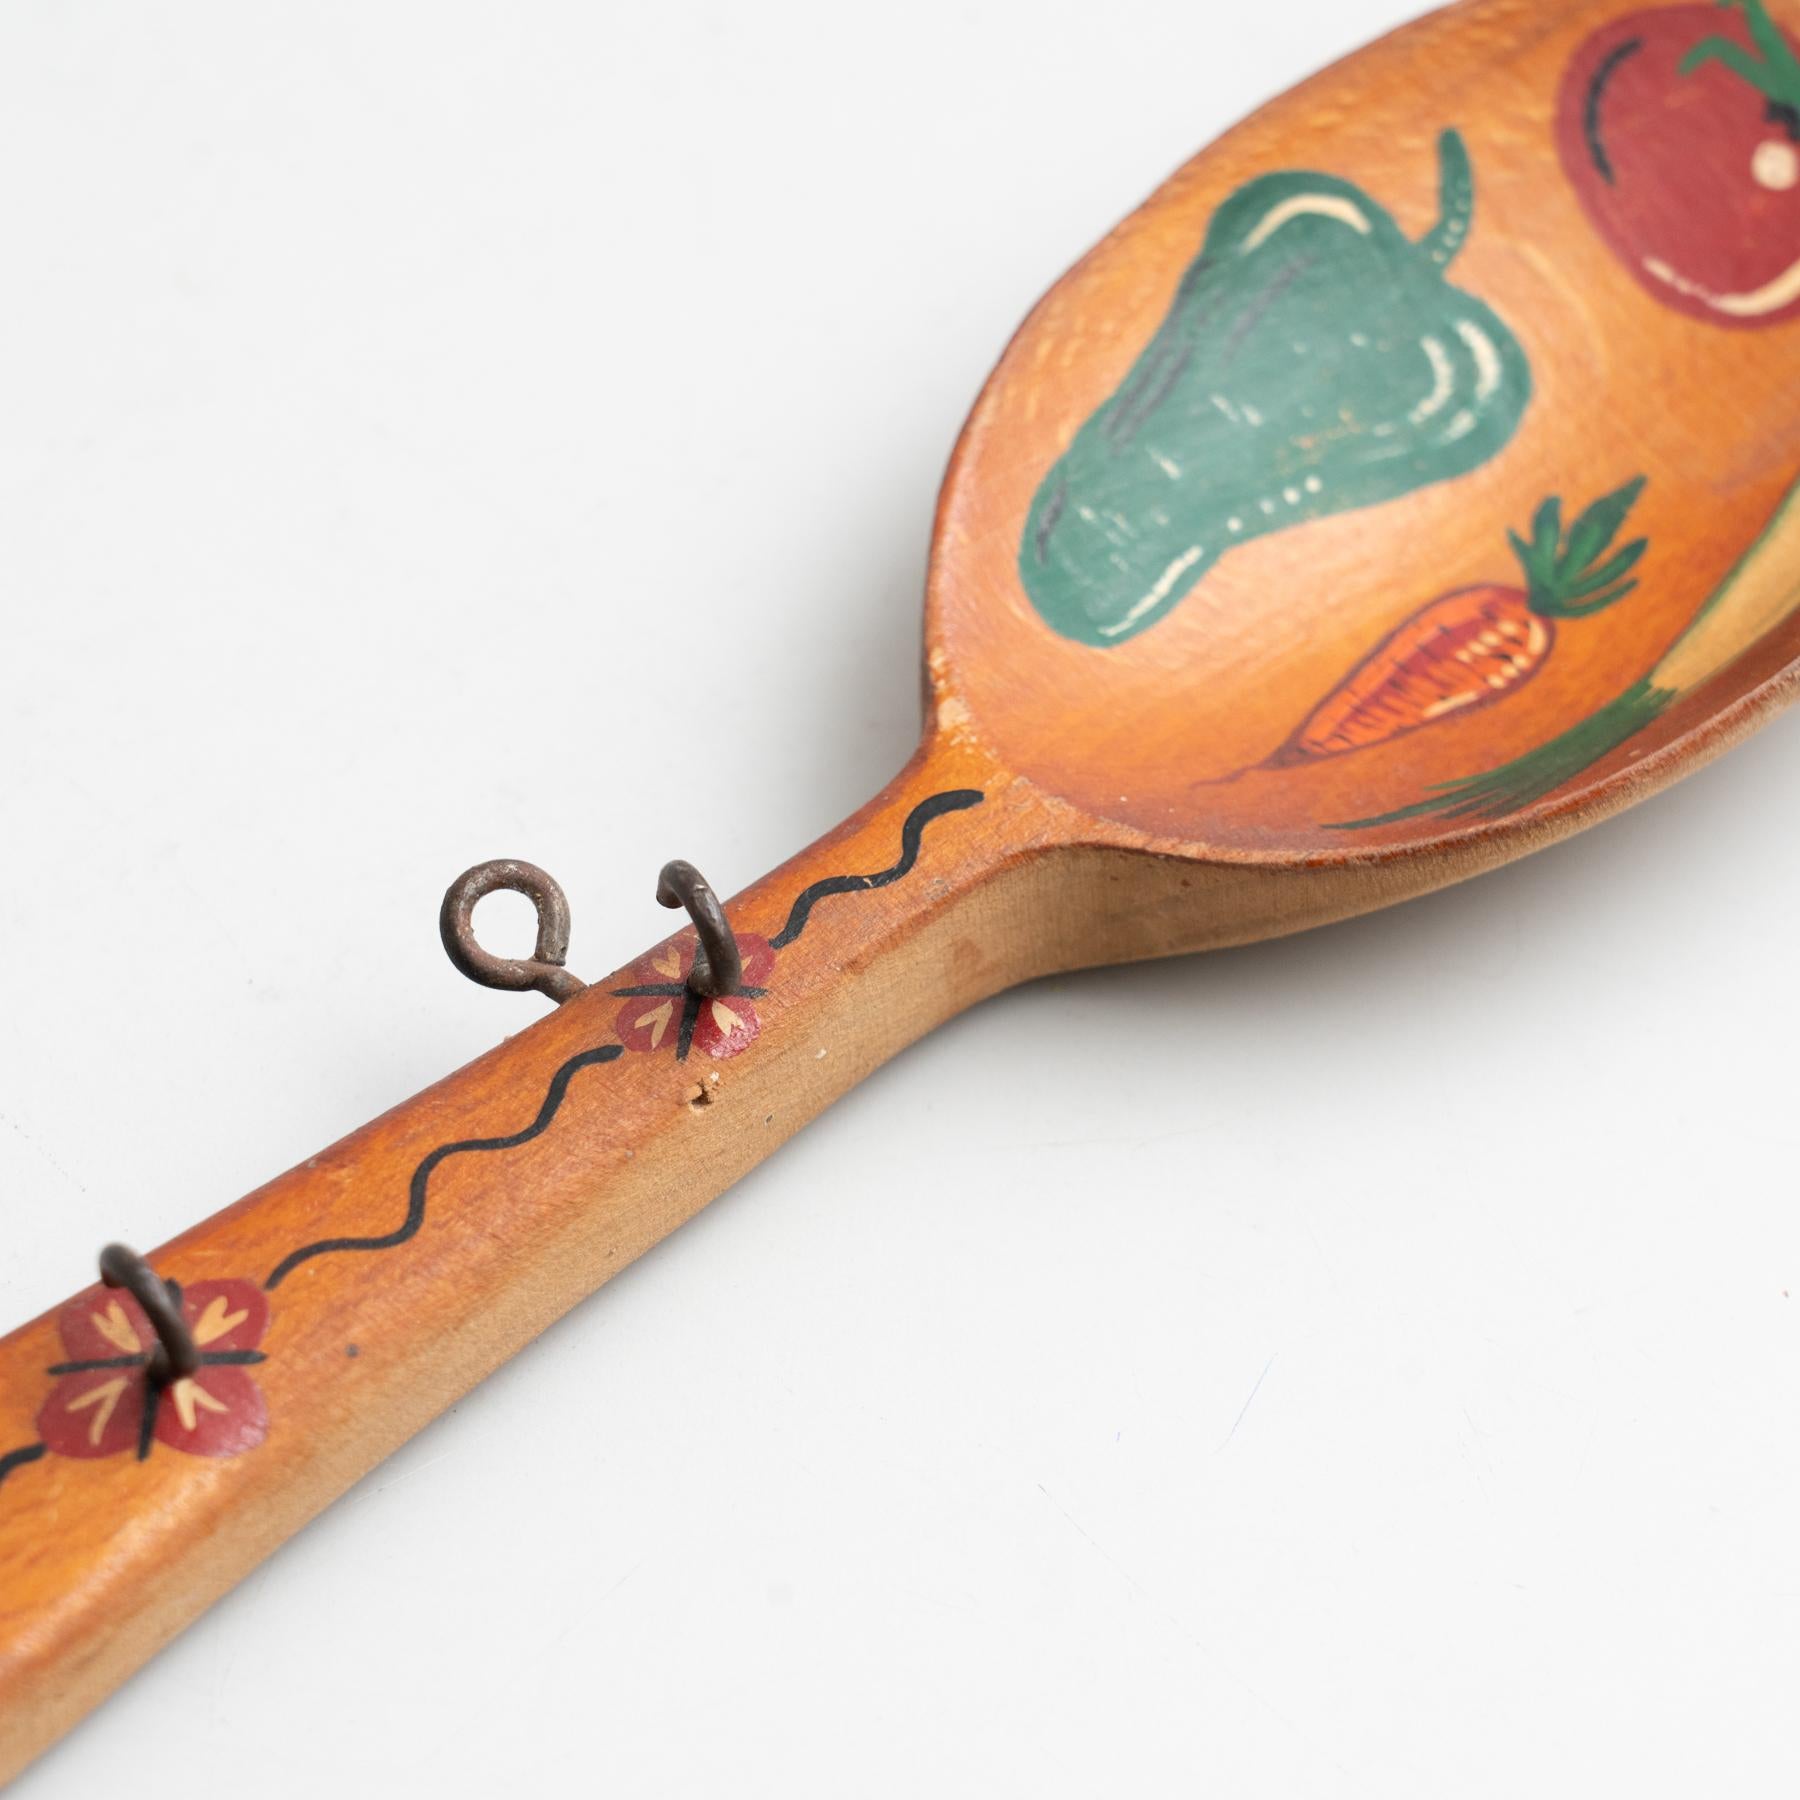 Mid-Century Modern Traditional Rustic Wood Hand Painted Spoon Artwork from Spain, circa 1970 For Sale